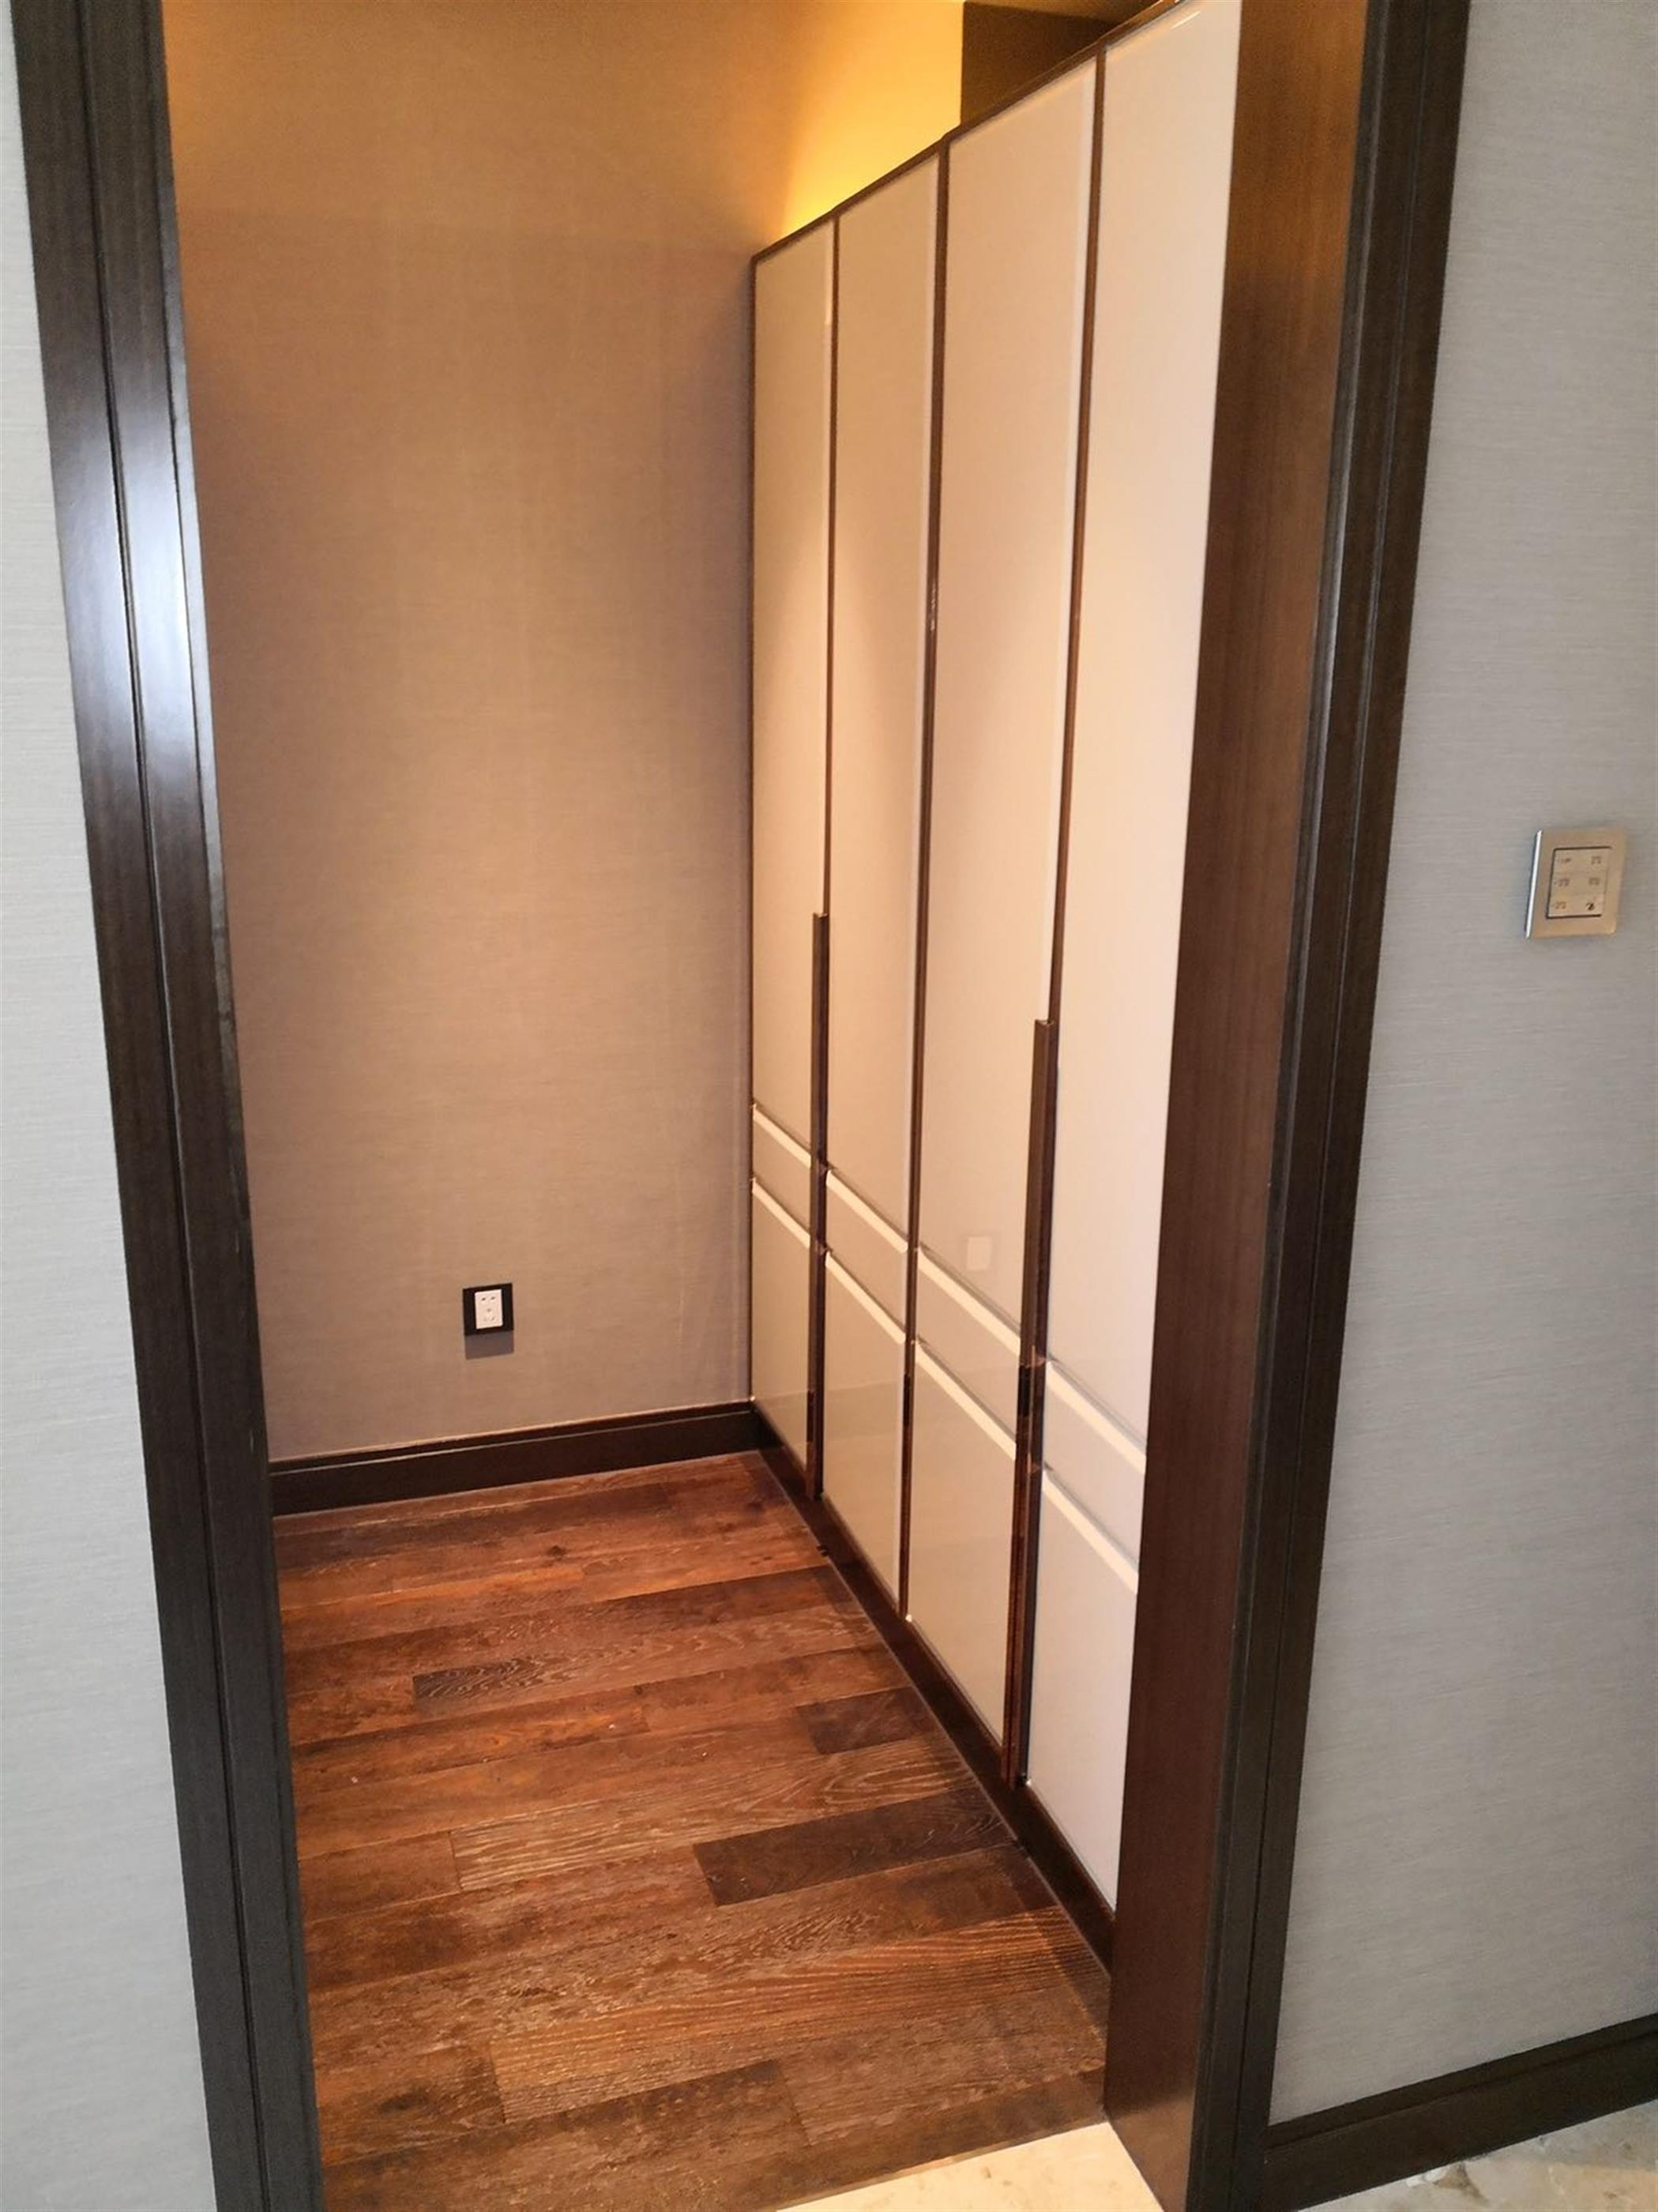 walk-in closet Deluxe Spacious Classic 3BR Apartment for Rent in Shanghai’s Xintiandi Neighborhood